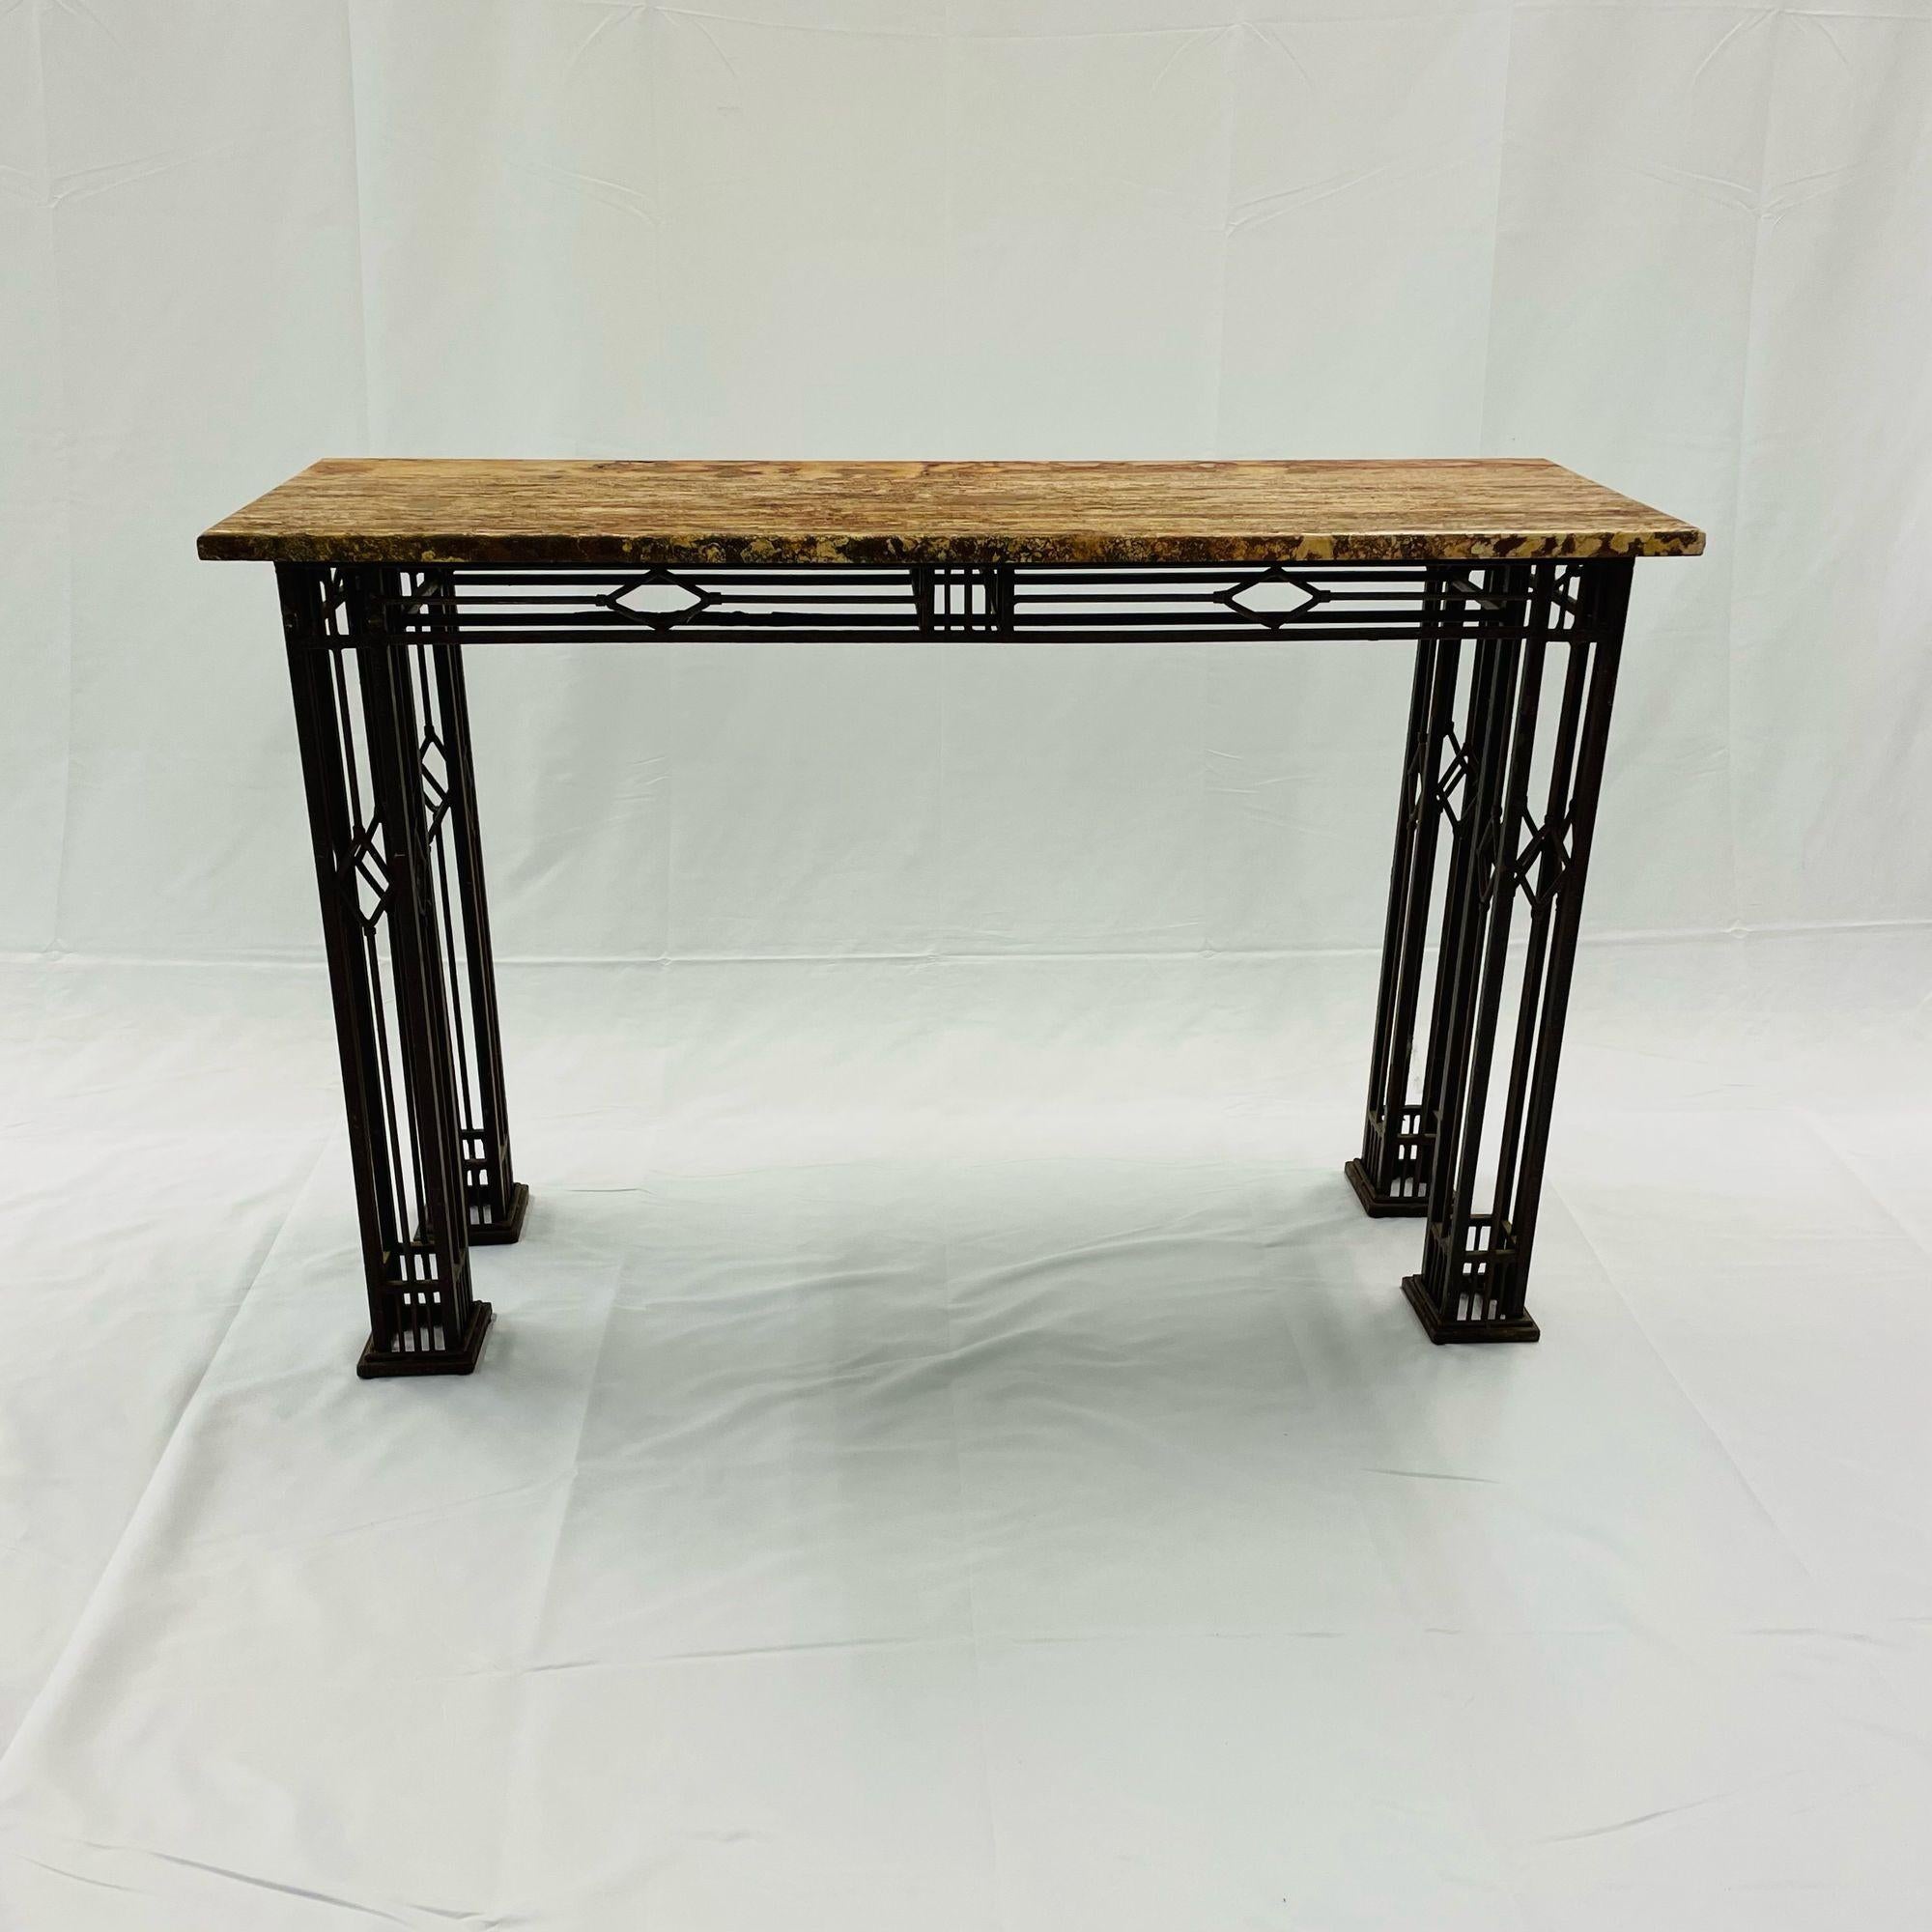 French Iron Work Console / Sofa Table, Marble Top
A finely cast table of console form having a marble top supported by a wrought iron base of mid century modern design. 
Wrought Iron, Marble
 
Base: 29H x 42W x 12D
Top: 30H x 45W x 15D.